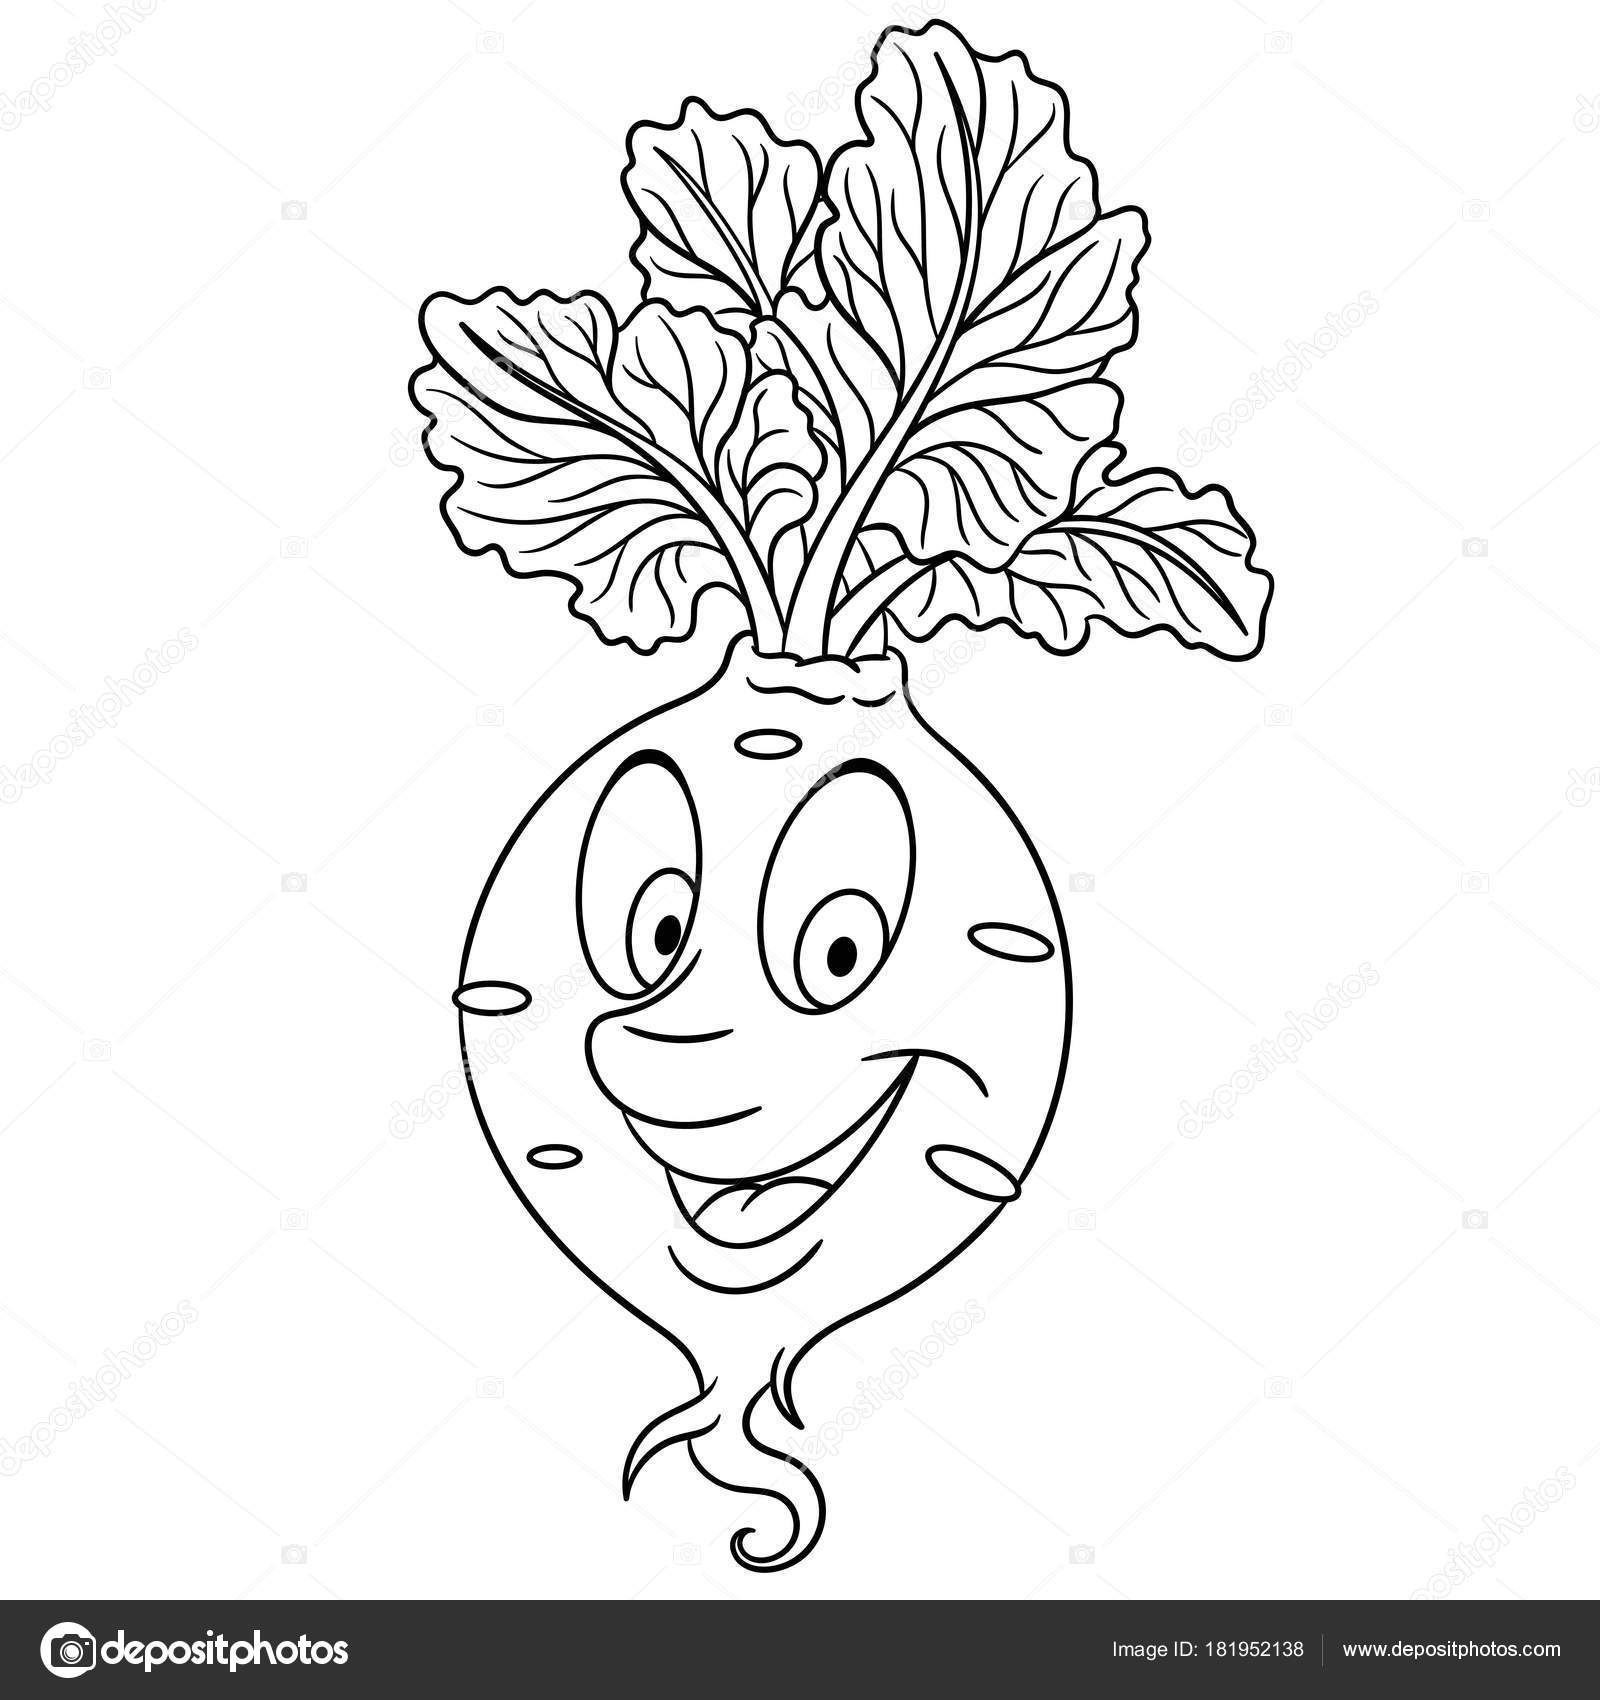 5700 Cartoon Vegetable Coloring Pages For Free